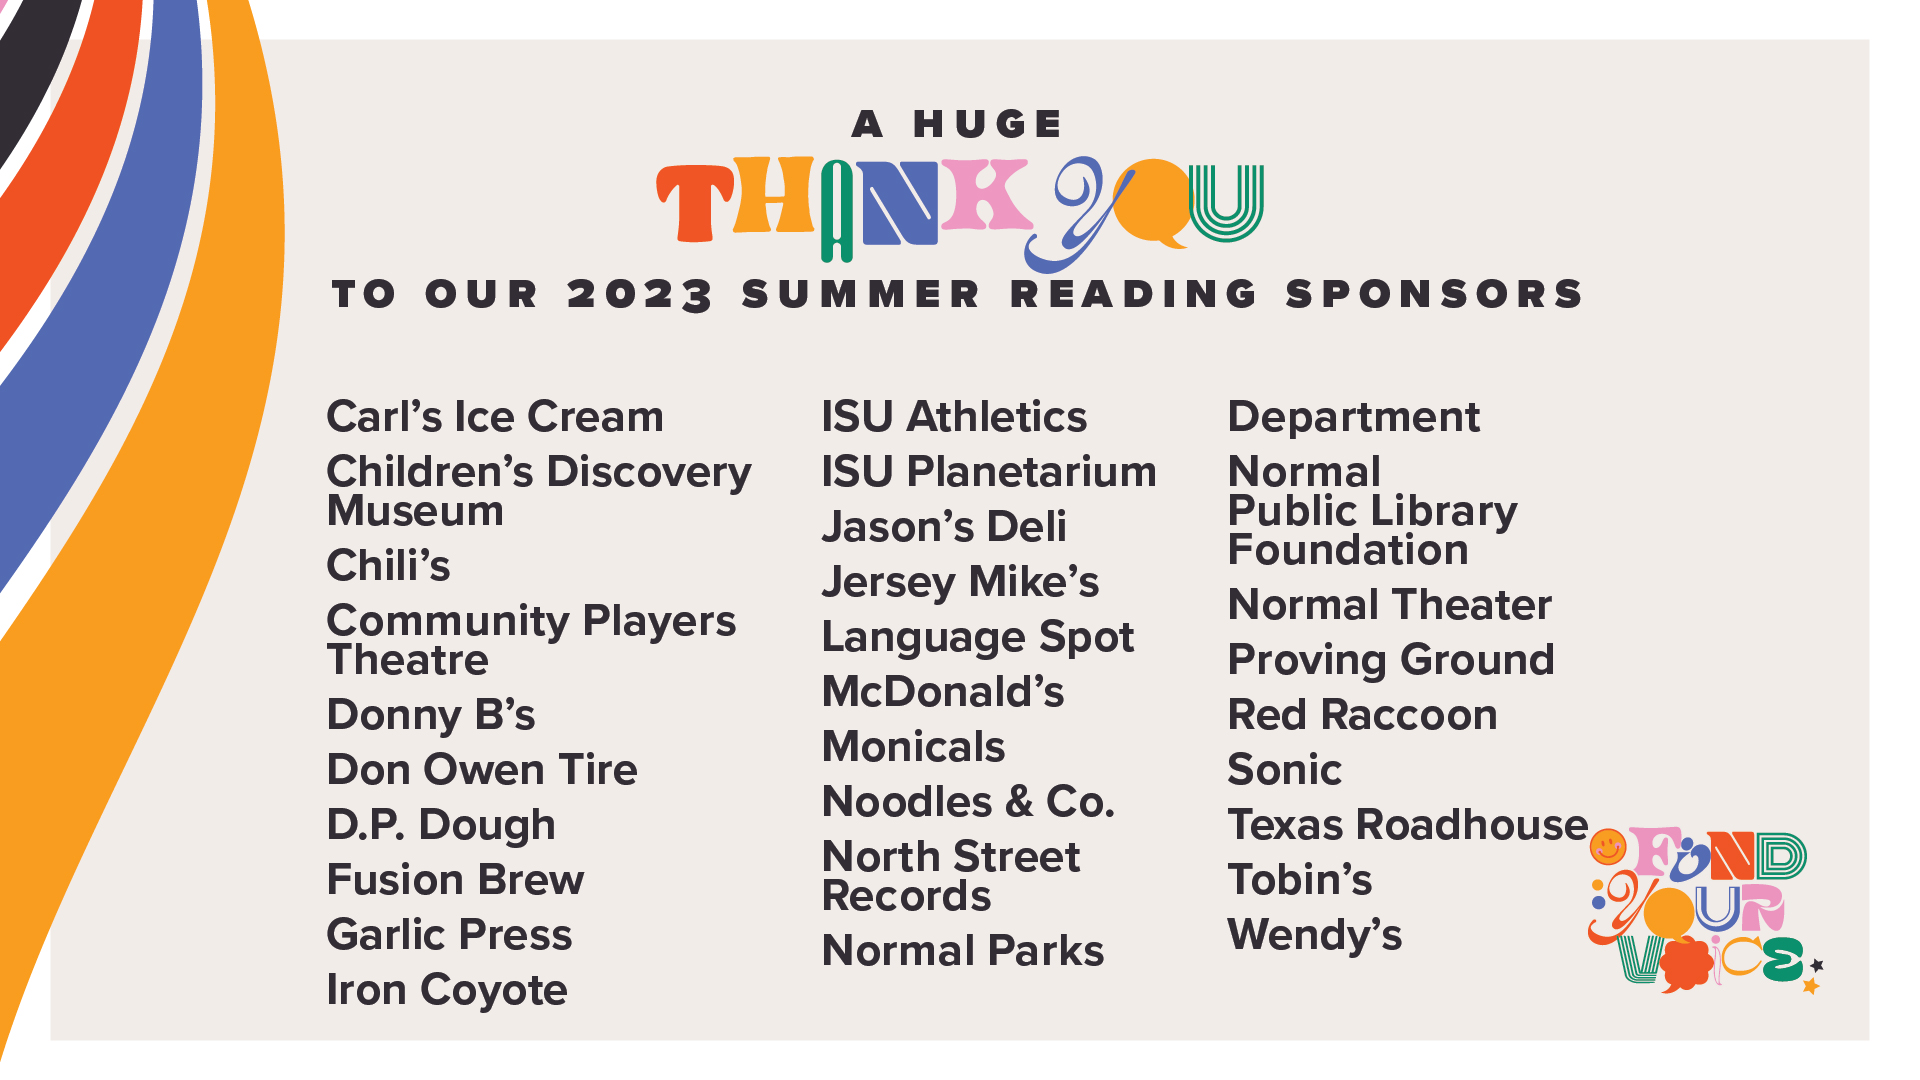 A huge thank you to all our 2023 Summer Reading sponsors  Carl’s Ice Cream  Children’s Discovery Museum  Chili’s  Community Players Theatre  Donny B’s  Don Owen Tire  D.P. Dough  Fusion Brew  Garlic Press  Iron Coyote  ISU Athletics  ISU Planetarium  Jason’s Deli  Jersey Mike’s  Language Spot  McDonald’s  Monicals Noodles & Co.  North Street Records  Normal Parks Department  Normal Theater  Proving Ground  Red Raccoon  Sonic  Texas Roadhouse  Tobin’s  Wendy’s